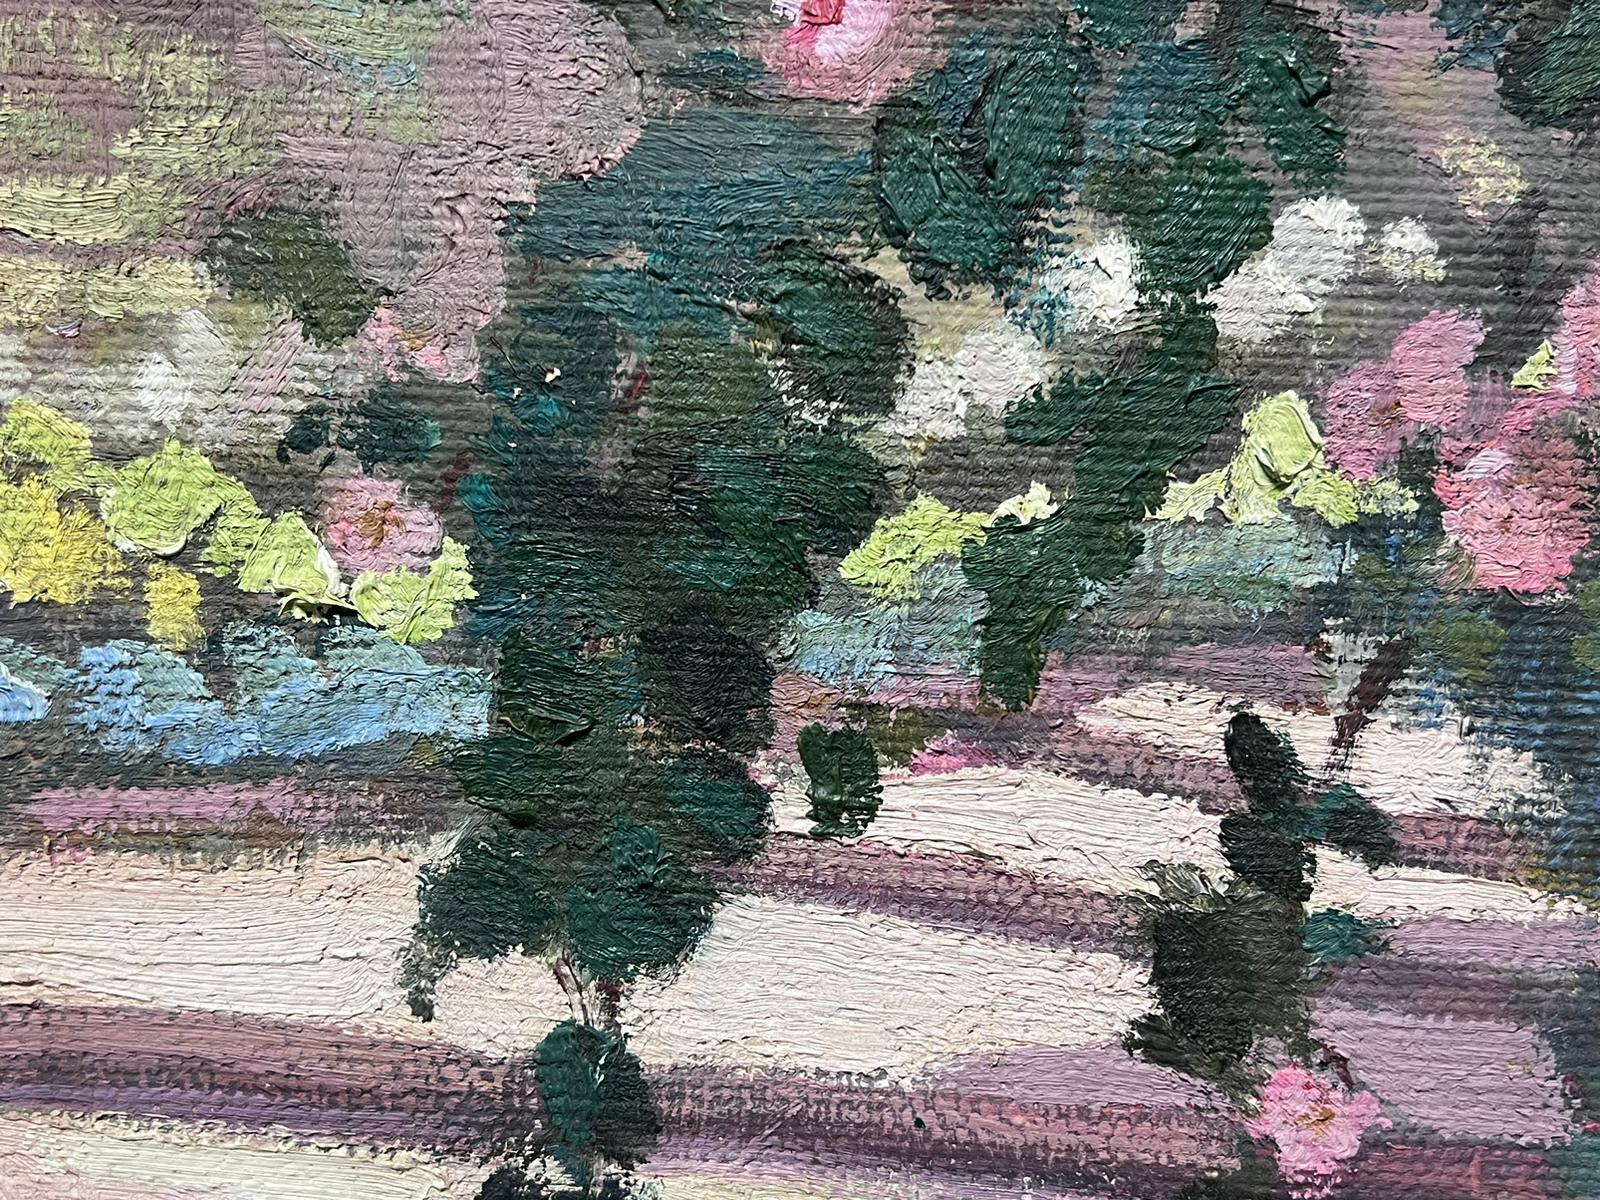 Pink Rose Bush
by Louise Alix (French, 1888-1980) *see notes below
provenance stamp to the back 
oil painting on canvas, framed
frame measures: 10.5 high by 15 inches wide
canvas measures: 9.75 high and 14 wide
condition: overall very good and